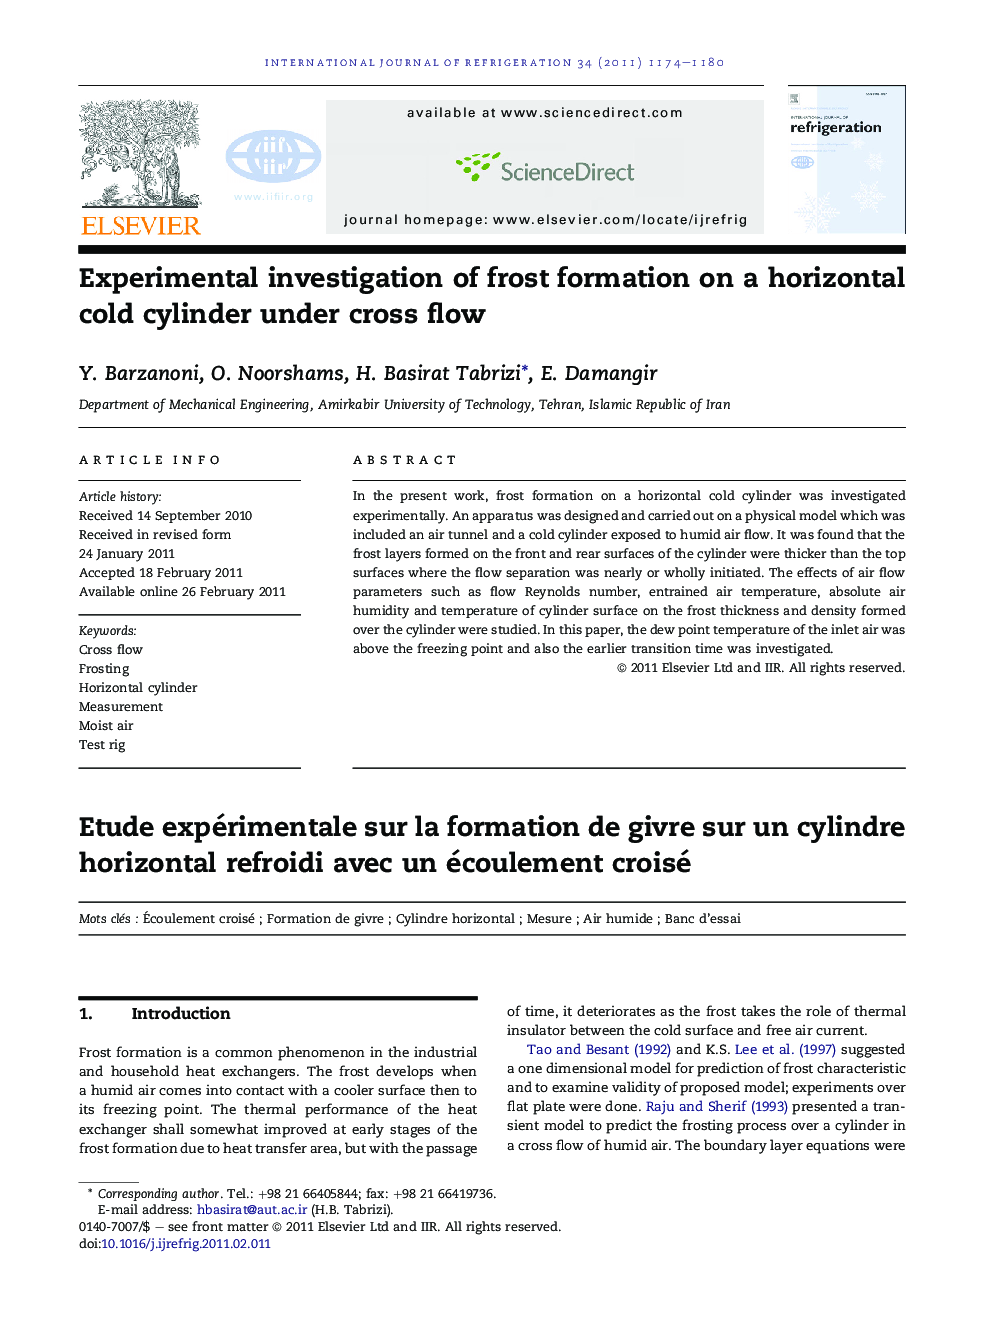 Experimental investigation of frost formation on a horizontal cold cylinder under cross flow